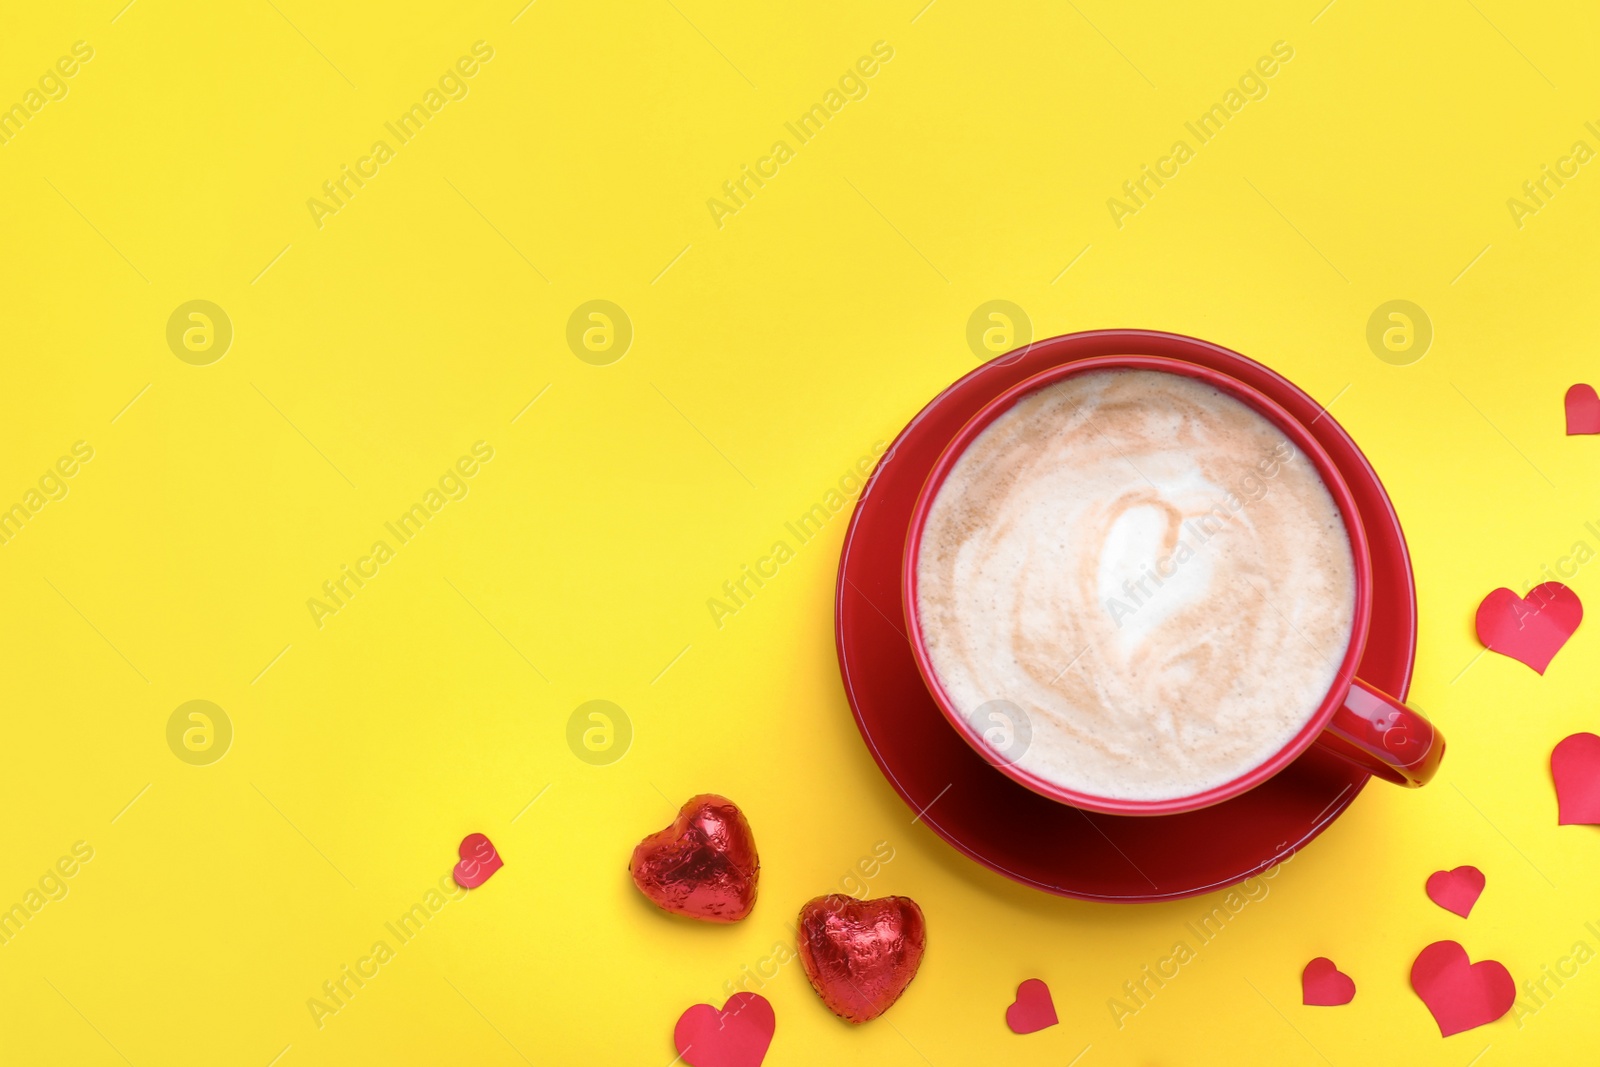 Photo of Cup of coffee, chocolate candies and paper hearts on yellow background, flat lay with space for text. Valentine's day breakfast